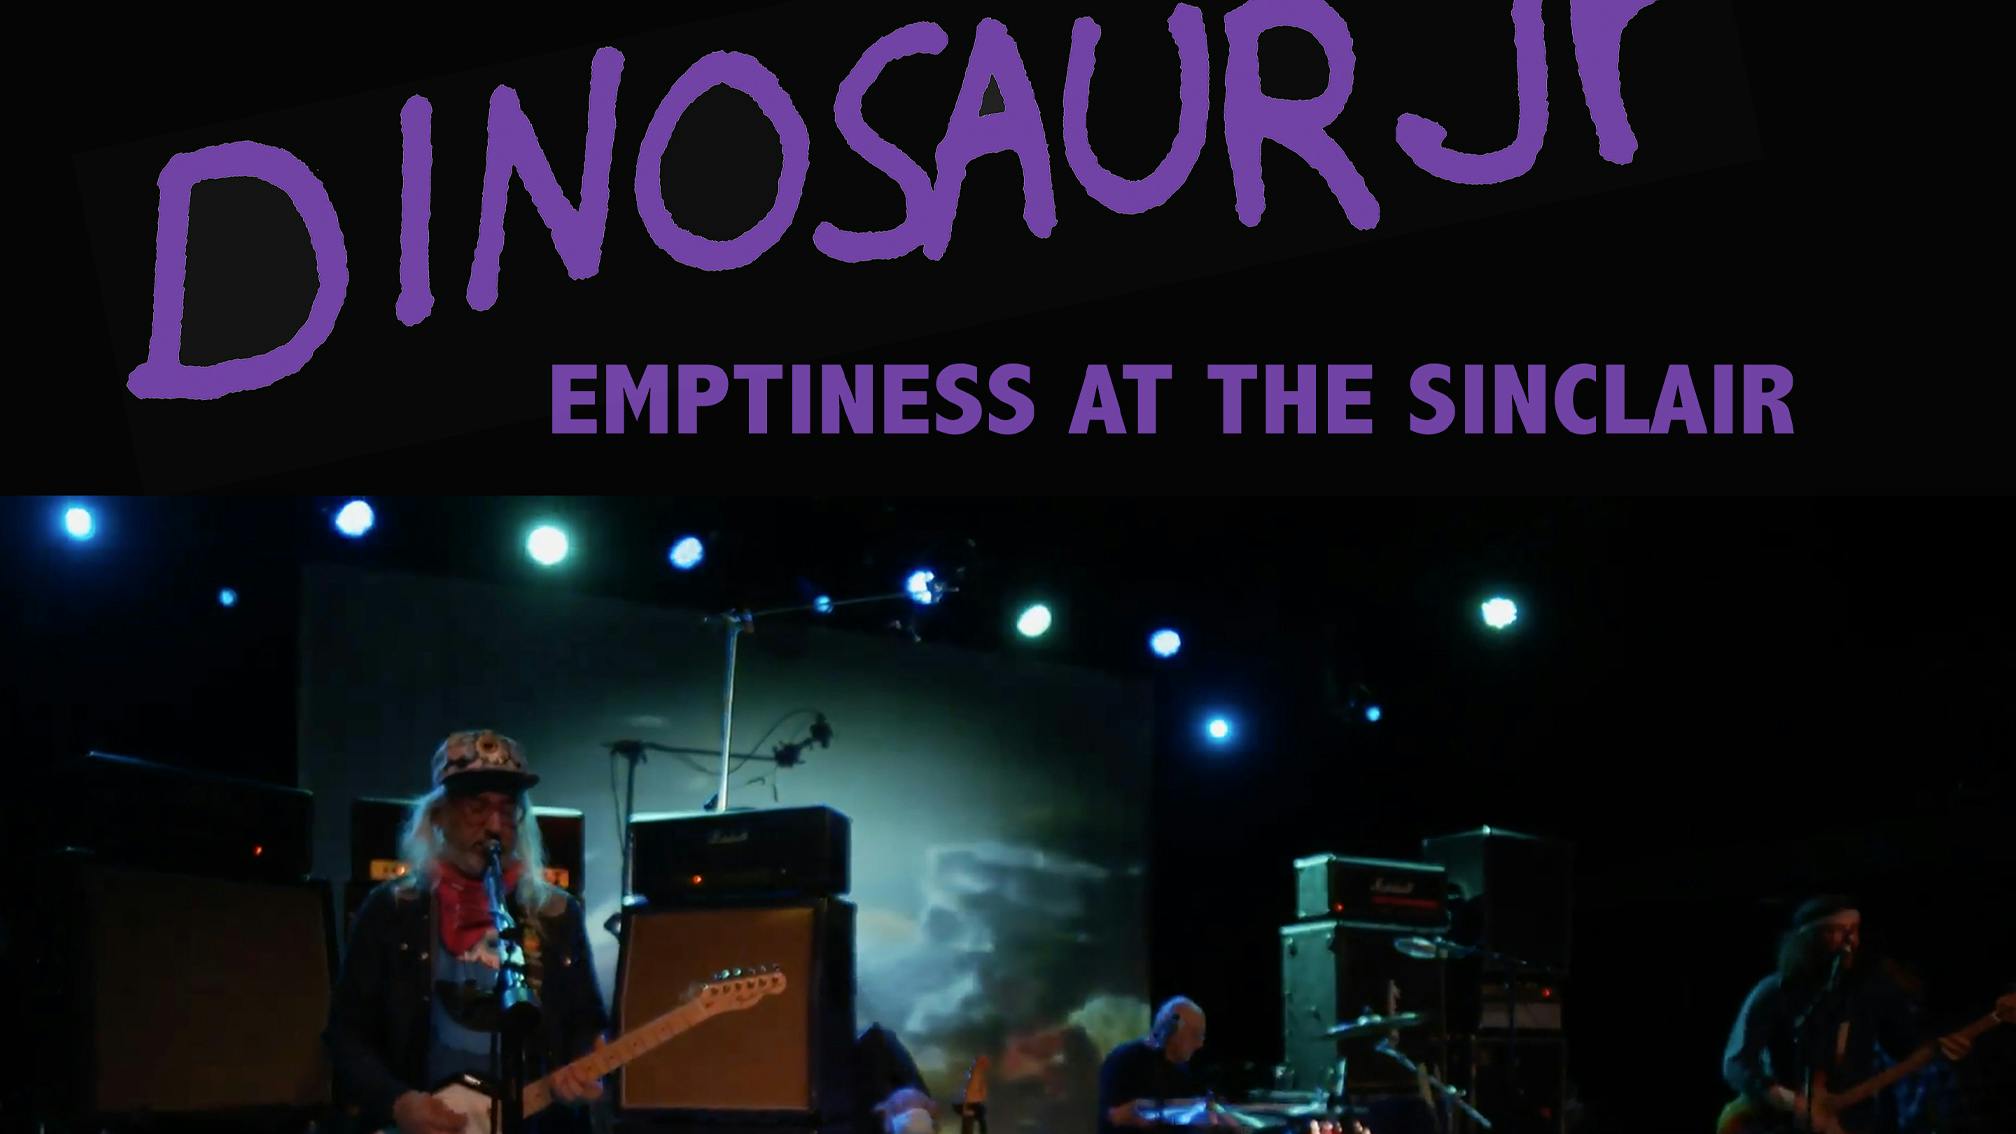 Listen to Dinosaur Jr.’s new live album, Emptiness At The Sinclair